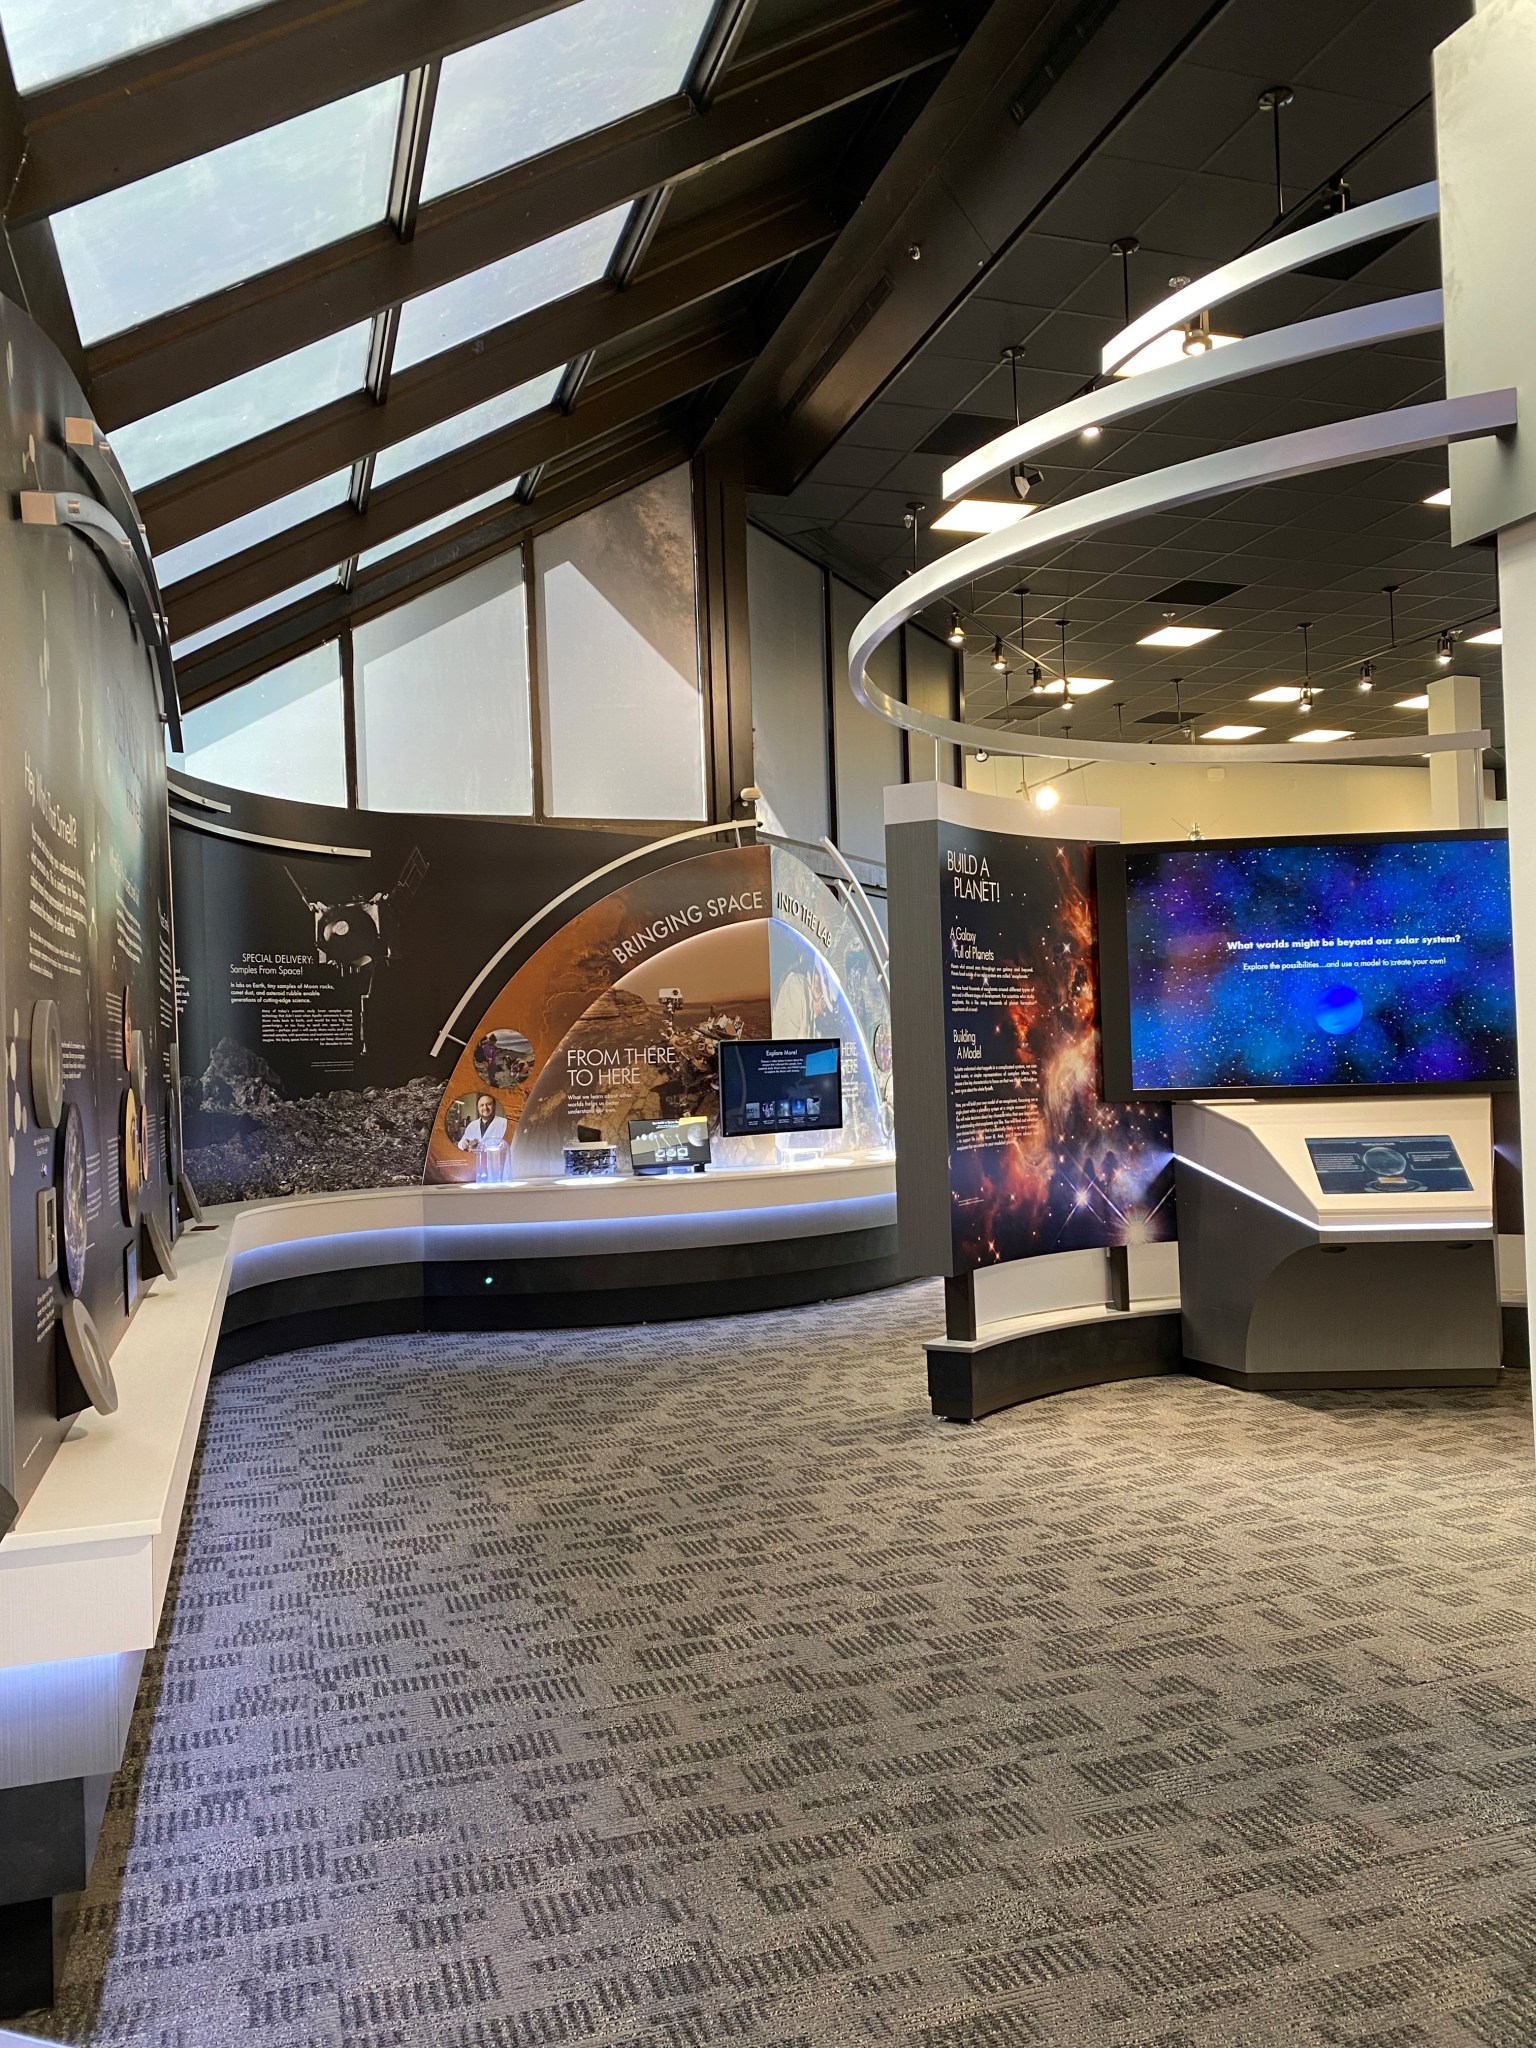 Wall panels from a colorful space museum exhibit line the walls of a large room with tall windows and skylights, a black ceiling, and gray carpet. The panels feature colorful photos of galaxies, nebulas, and spacecraft landing on the Moon and Mars.